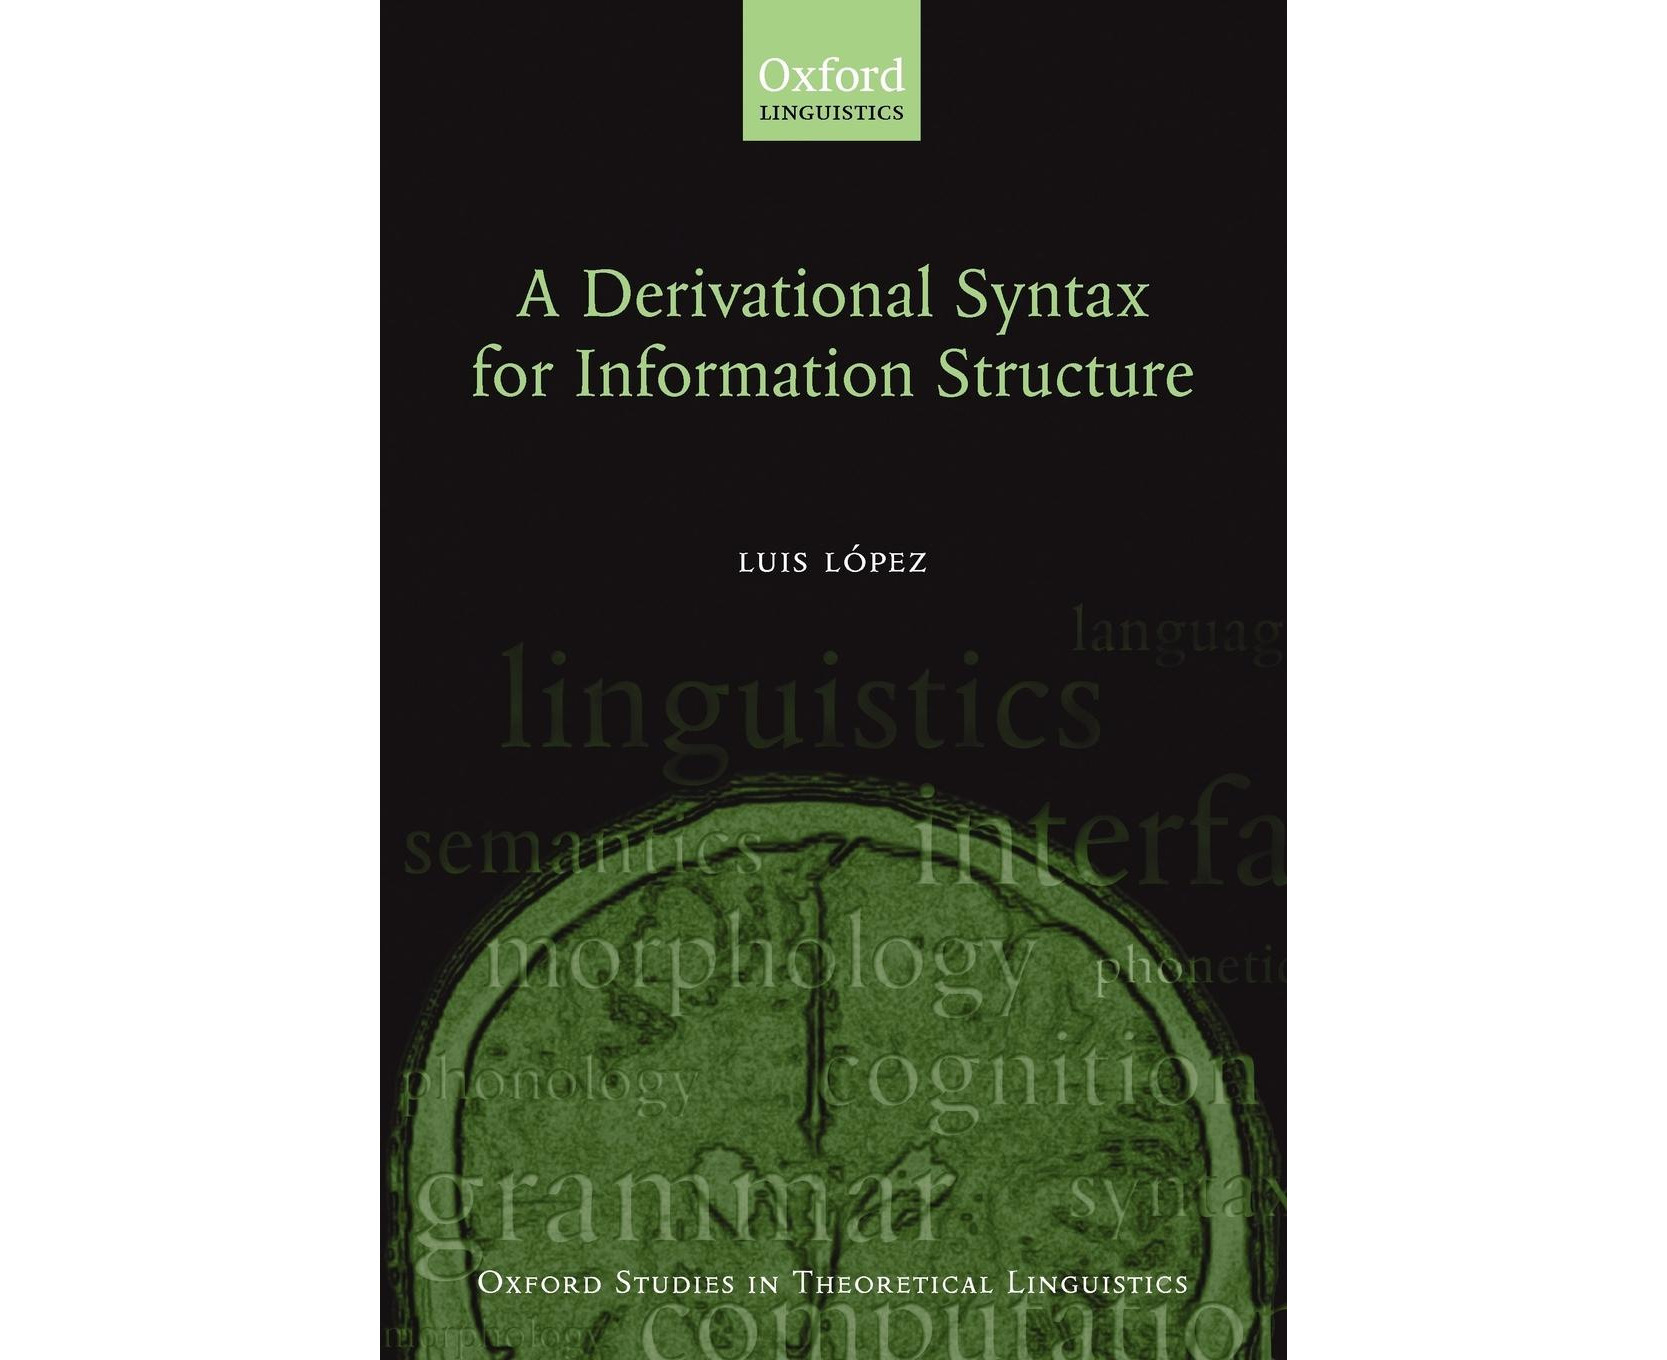 Derivational　Studies　Theoretical　A　Syntax　in　Information　for　(Oxford　Structure　Linguistics)